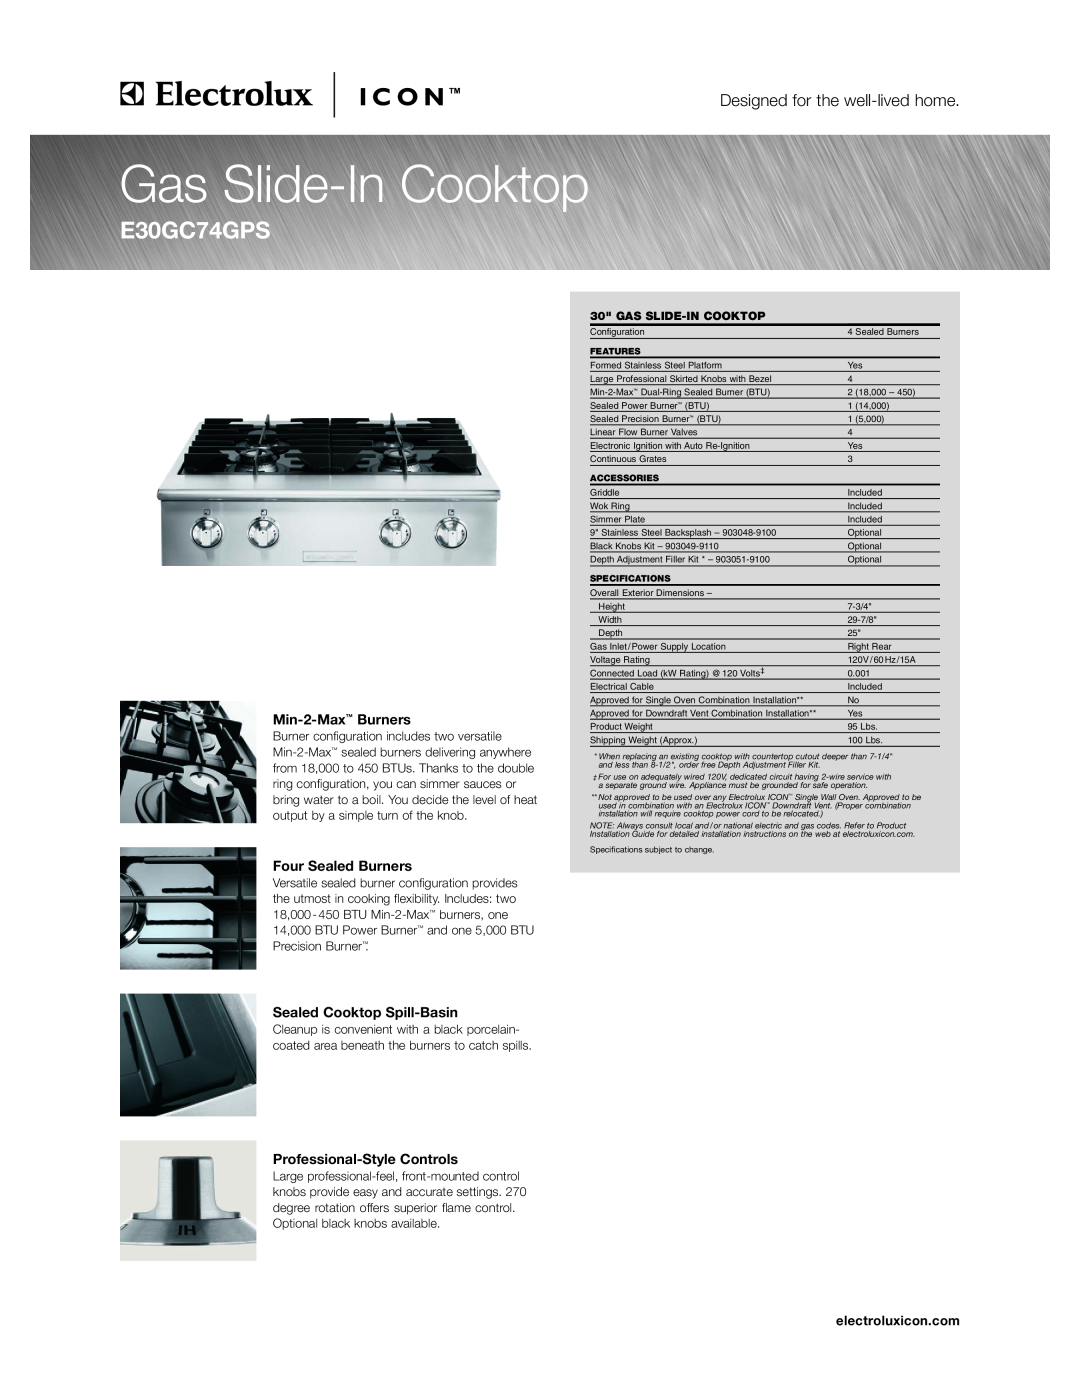 Electrolux E30GC74GPS specifications Gas Slide-In Cooktop, Designed for the well-lived home 